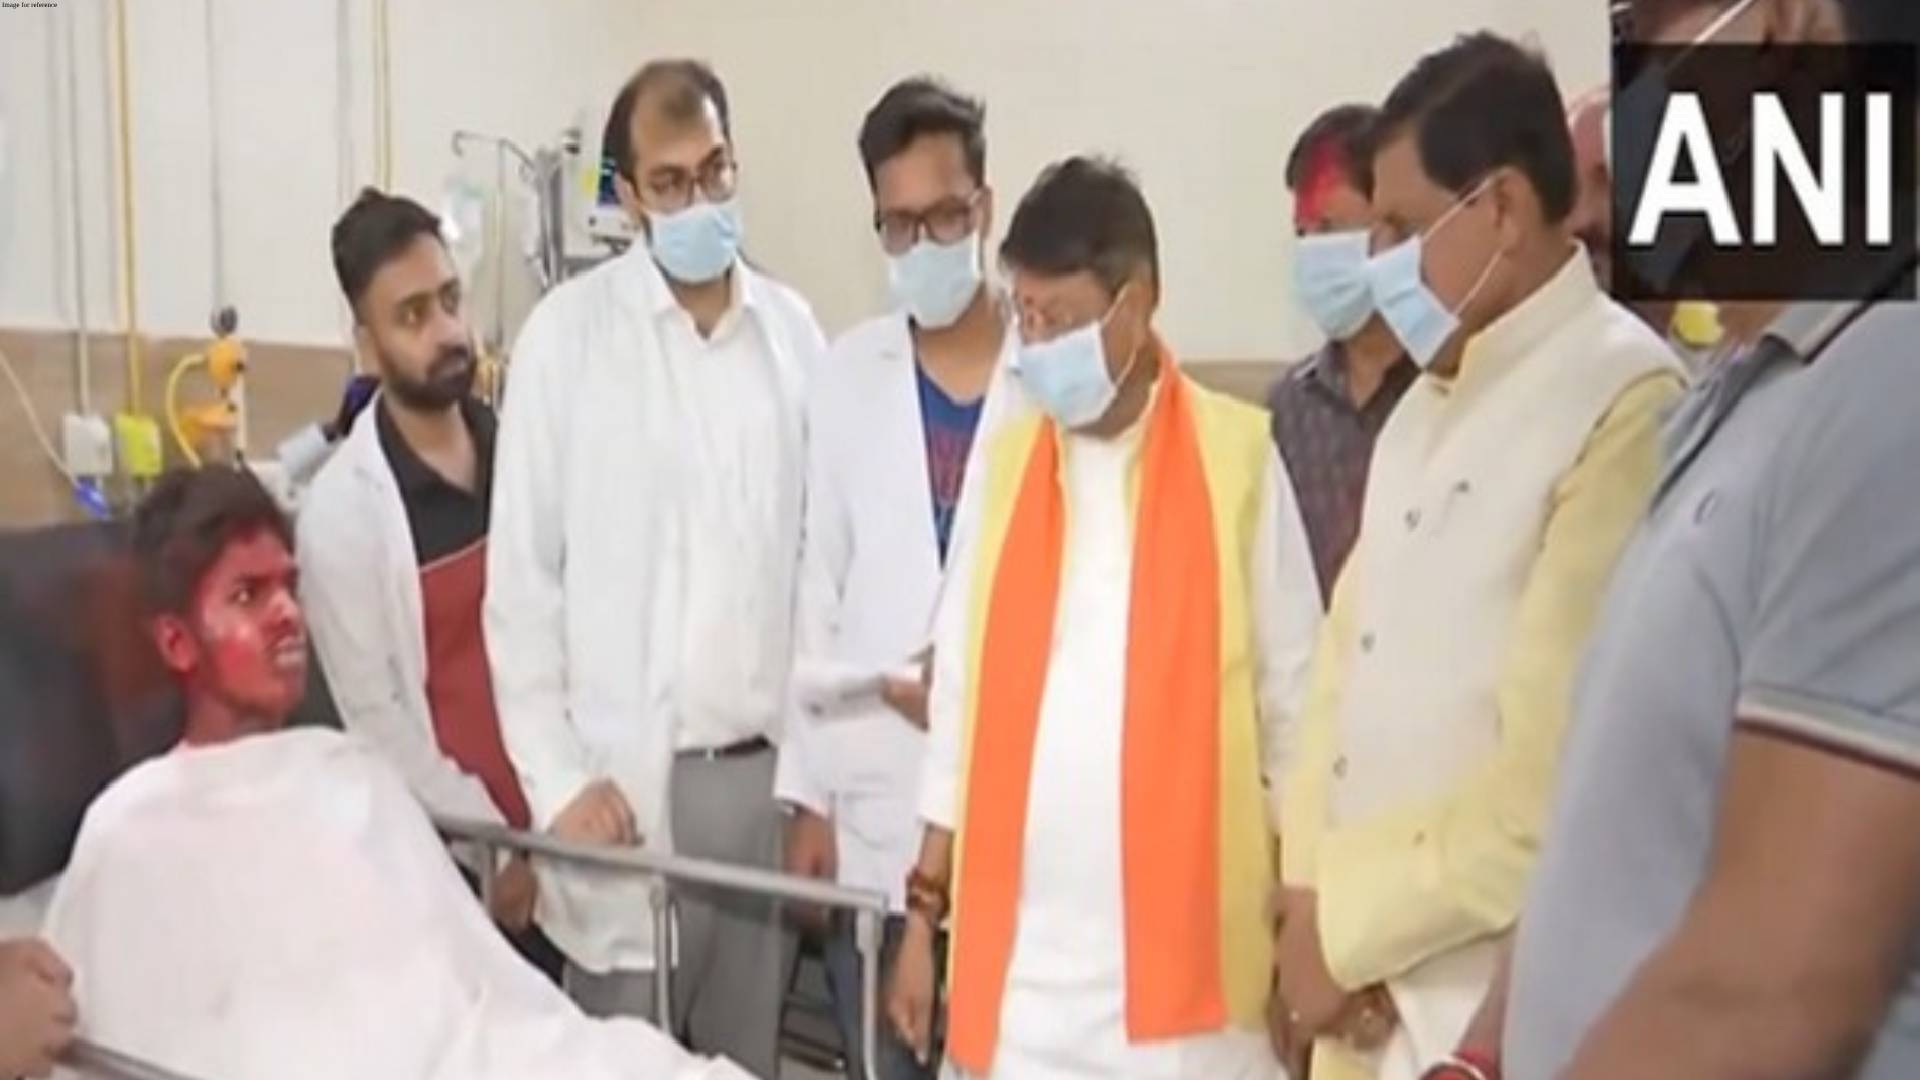 MP CM Mohan Yadav meets injured in fire incident at Ujjain's Mahakal temple at Indore hospital